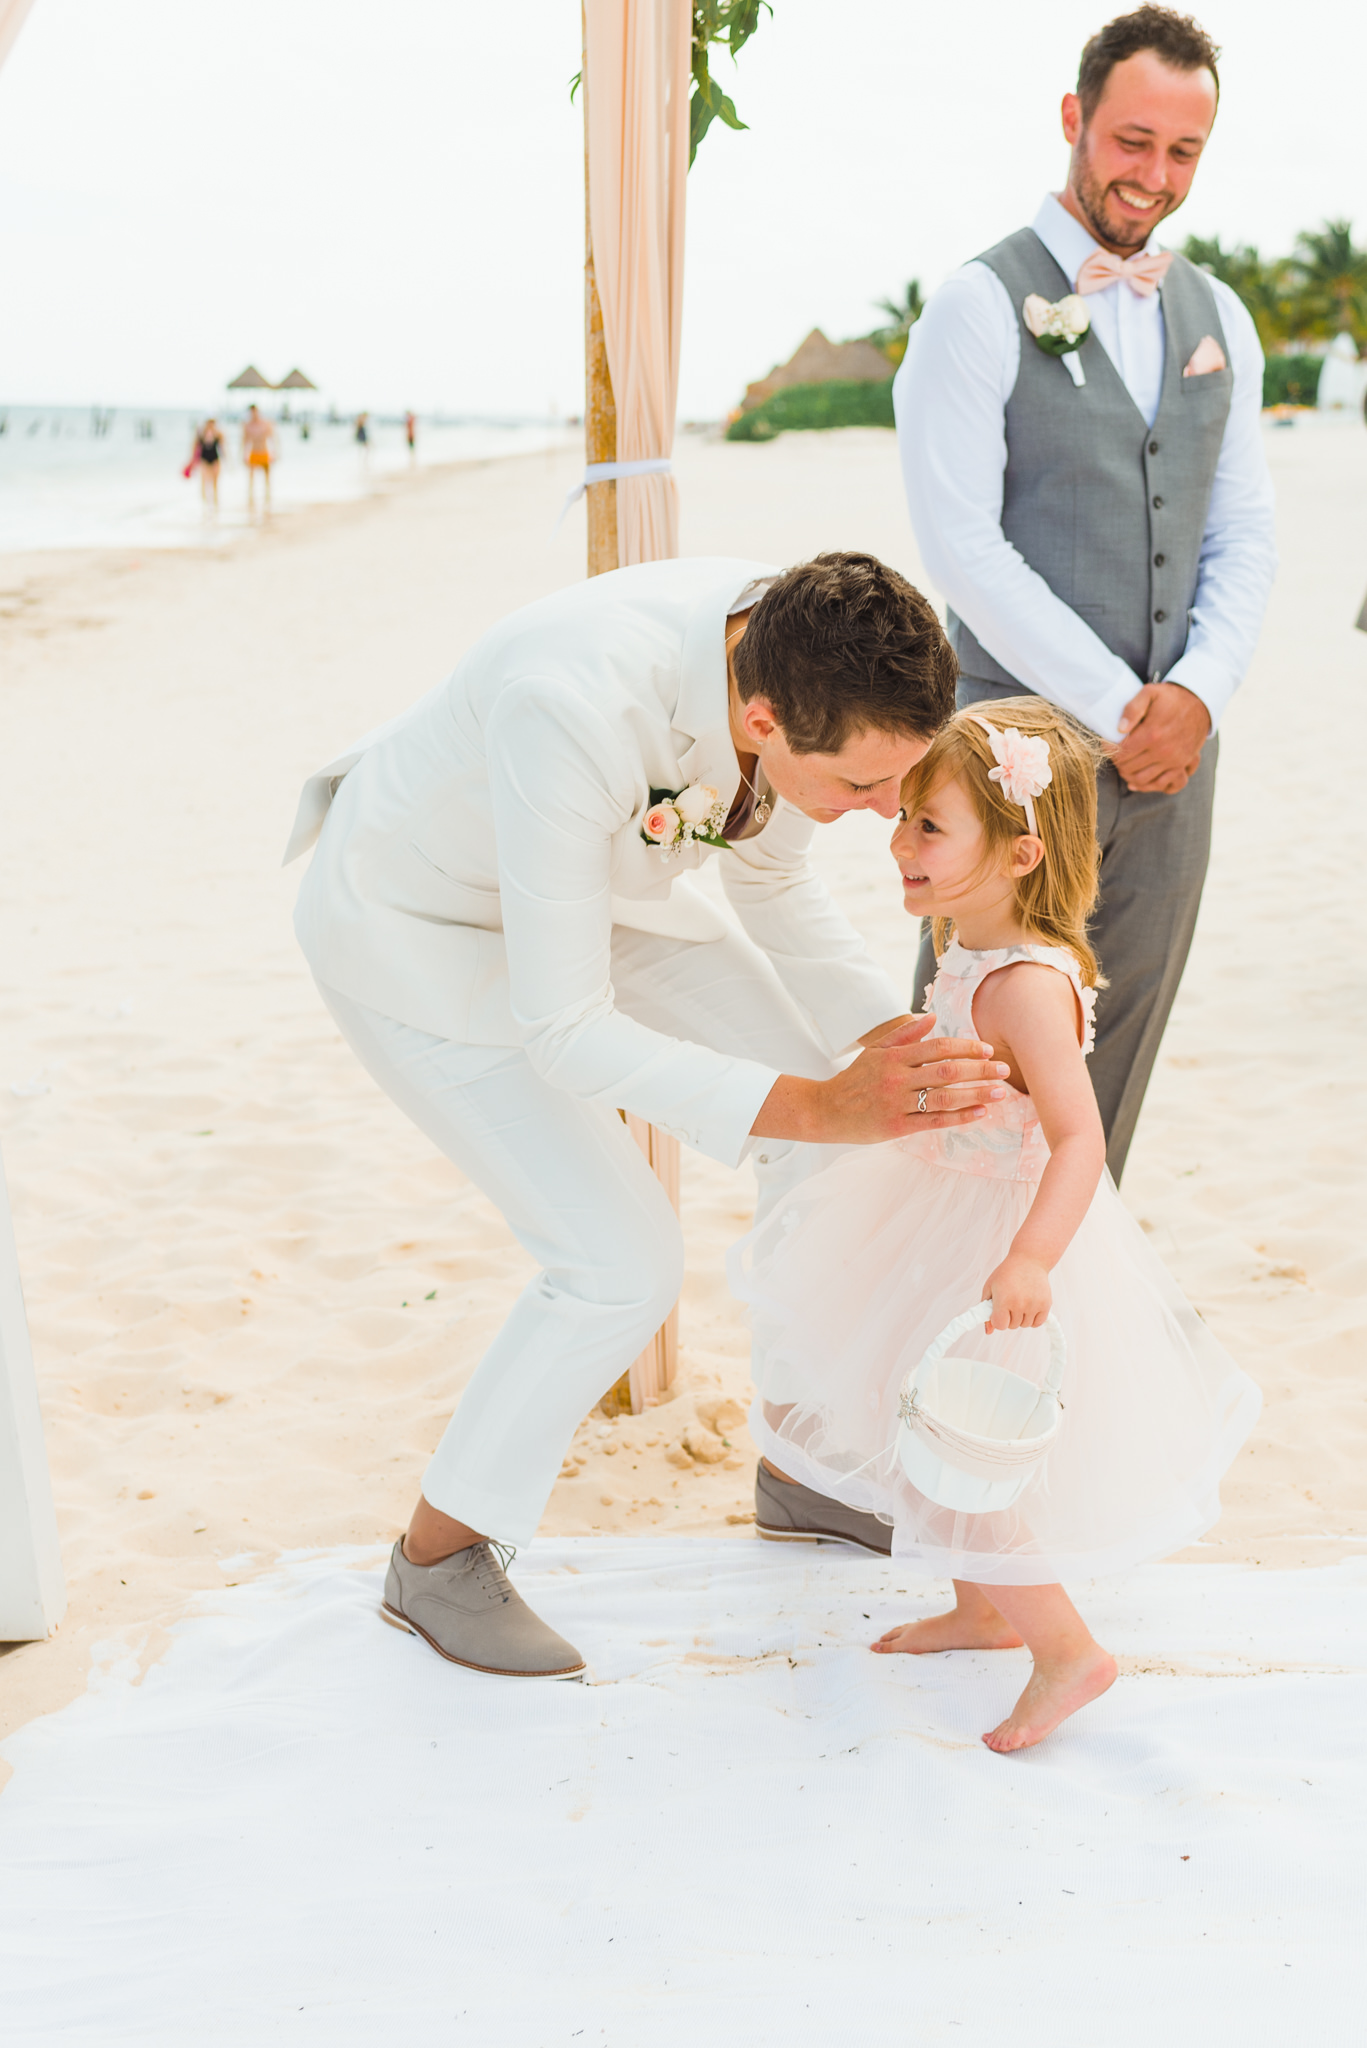 bride crouching down to greet a young girl at the wedding alter as a groomsman watches with a smile during beach ceremony at Now Sapphire Resort in Mexico